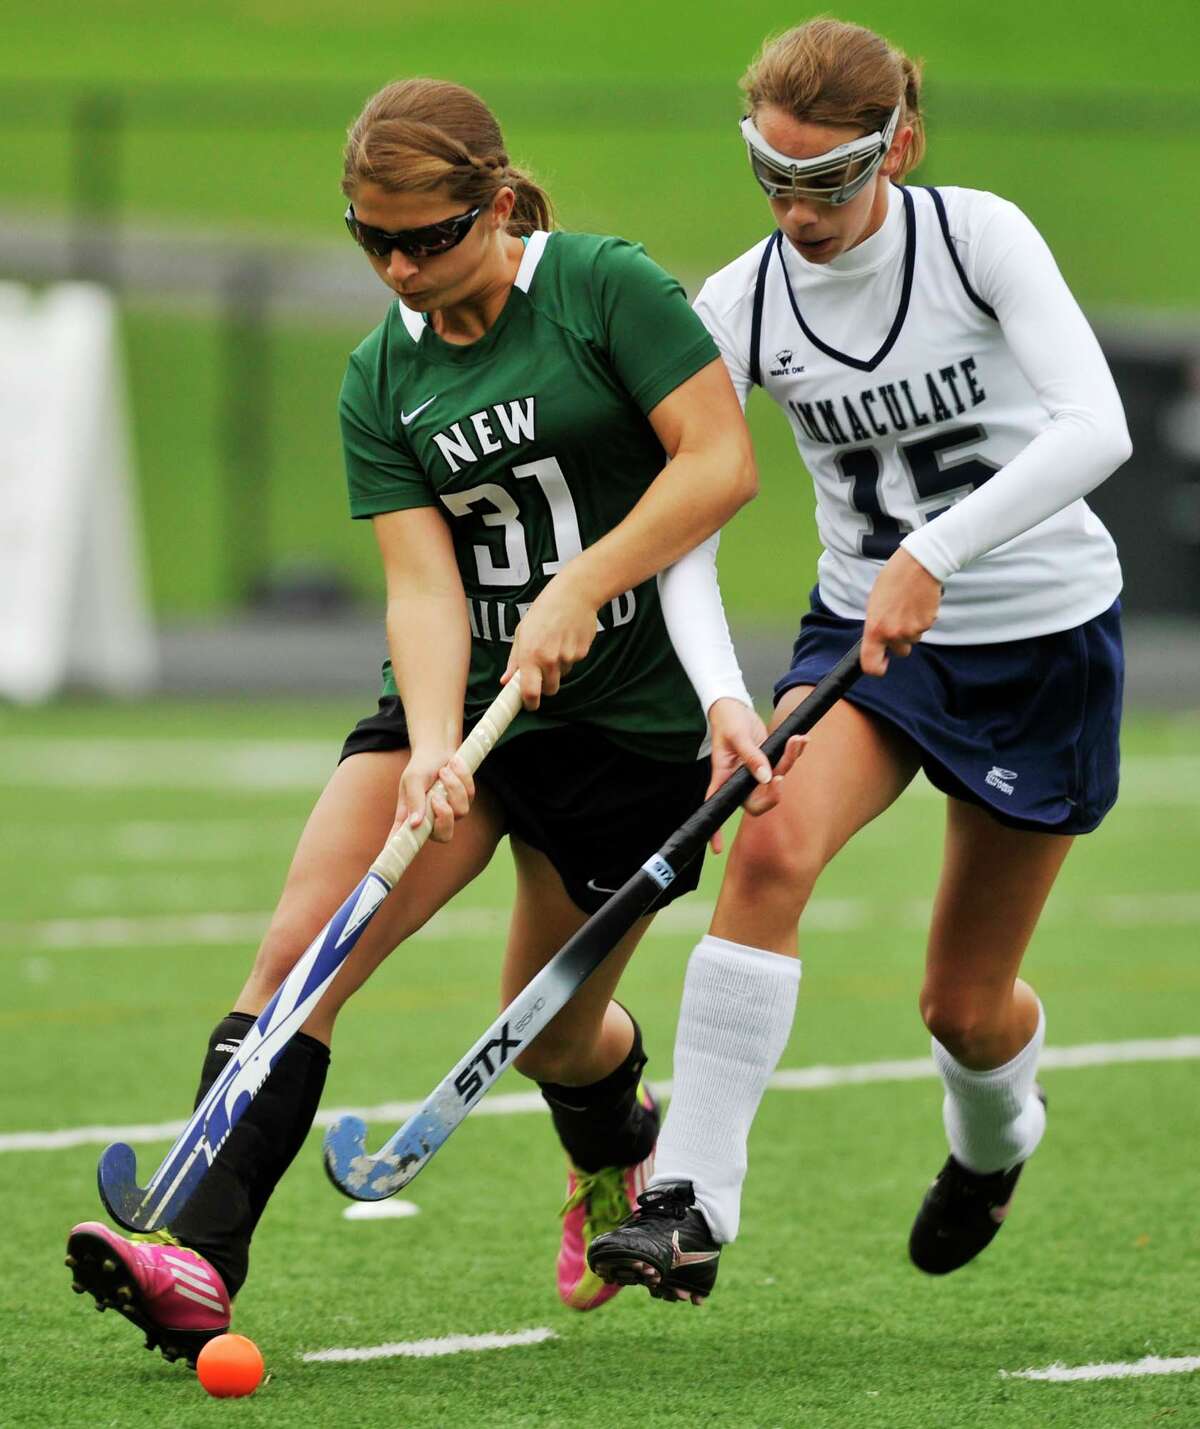 New Milford's Meghan Lacey fends off Immaculate's Katherine Archer during their game at Immaculate High School in Danbury on Tuesday, Oct. 9, 2012. New Milford won, 4-0.